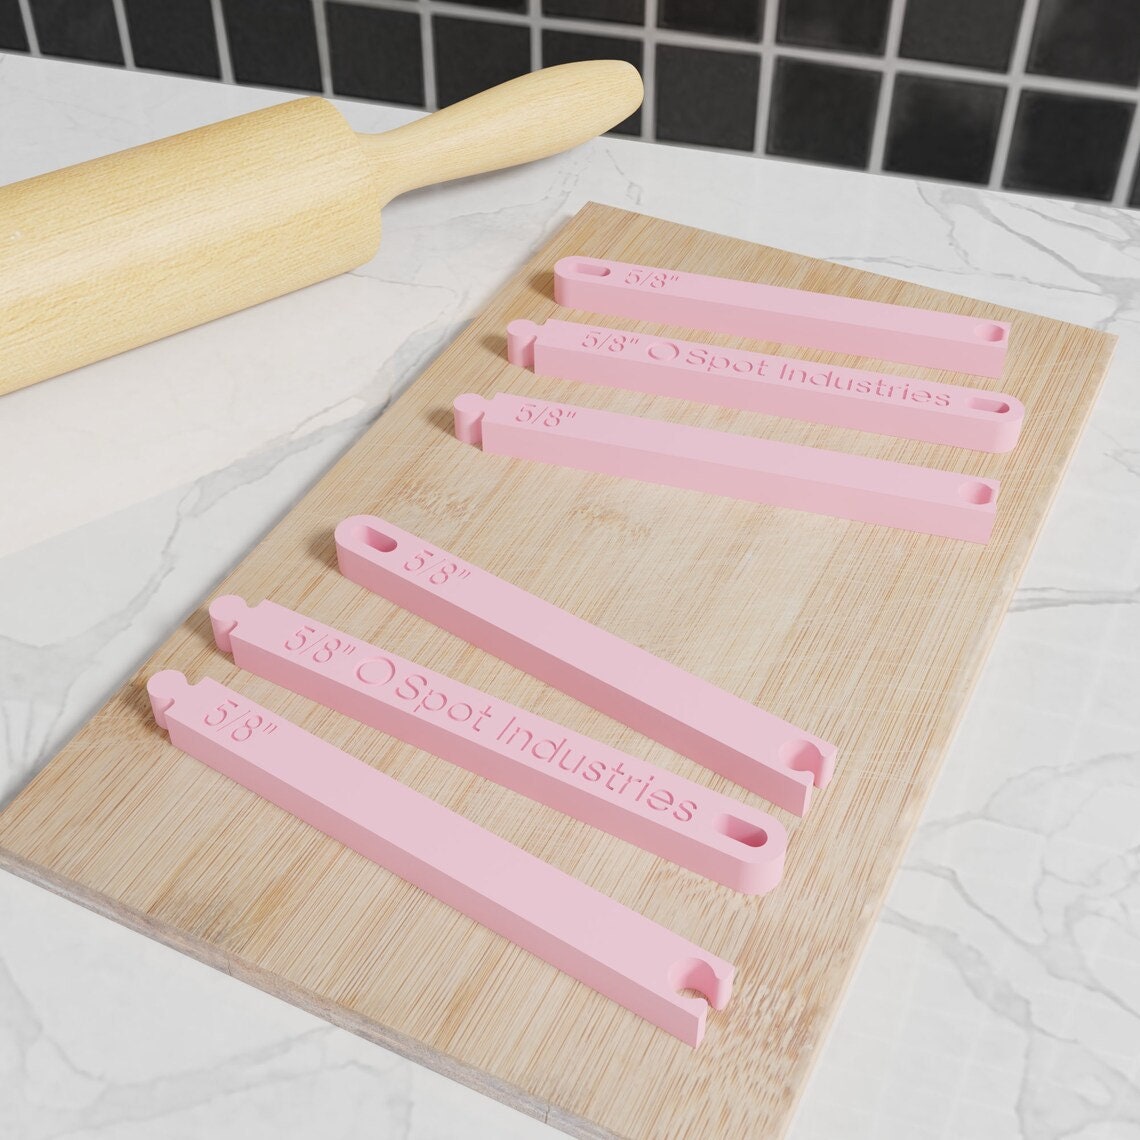 Extra Long Dough Sticks (Metric) in 25mm Thickness. Get The Perfect Dough Height Every Time With Our Extra Long Dough Sticks